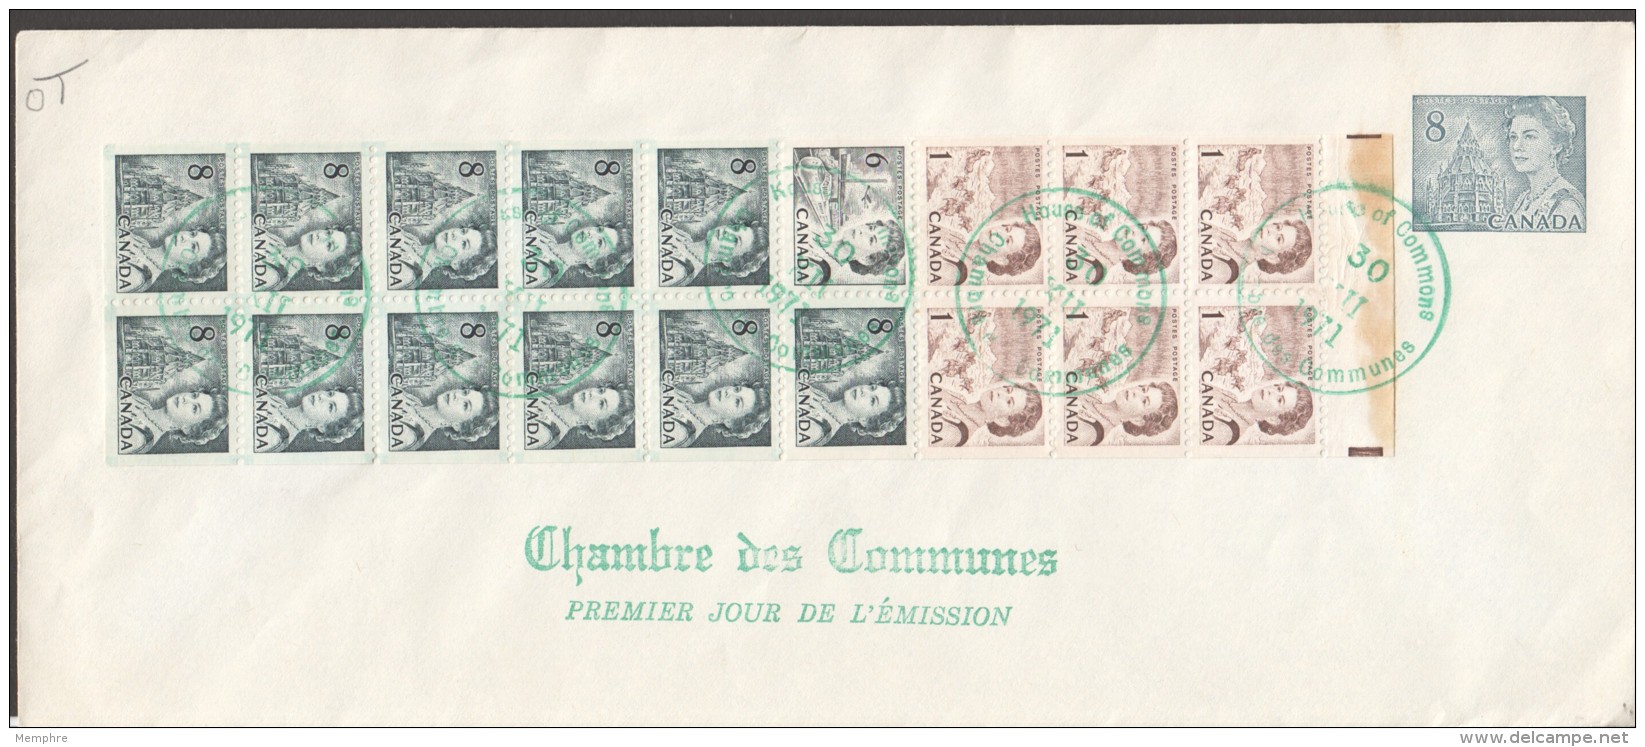 1971 Centennial Definitive 1 Cent And 8 Cent Booklet Sc 544b  House Of Commons FDC - 1971-1980